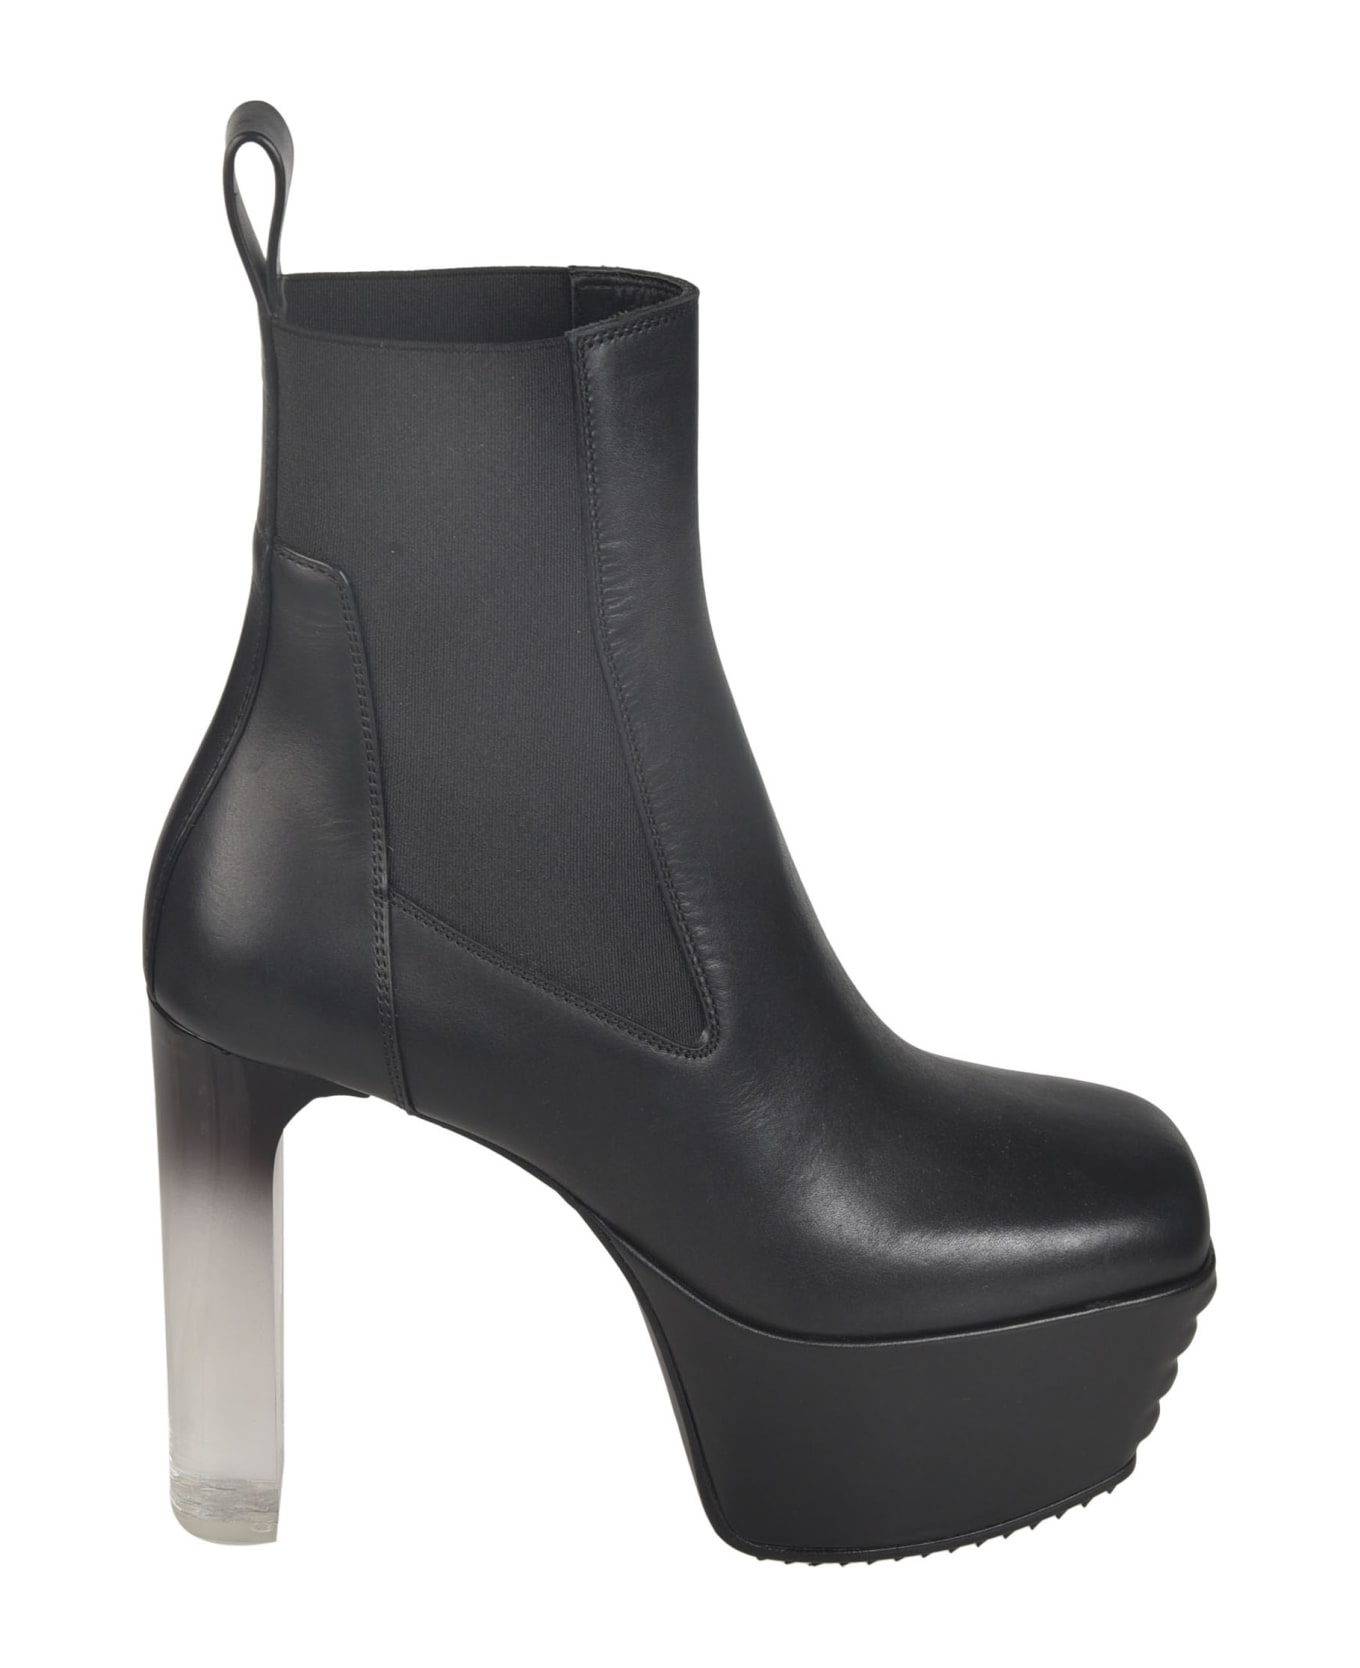 Rick Owens Open Toe Minimal Grill Beatle Boots - Black/Clear ブーツ